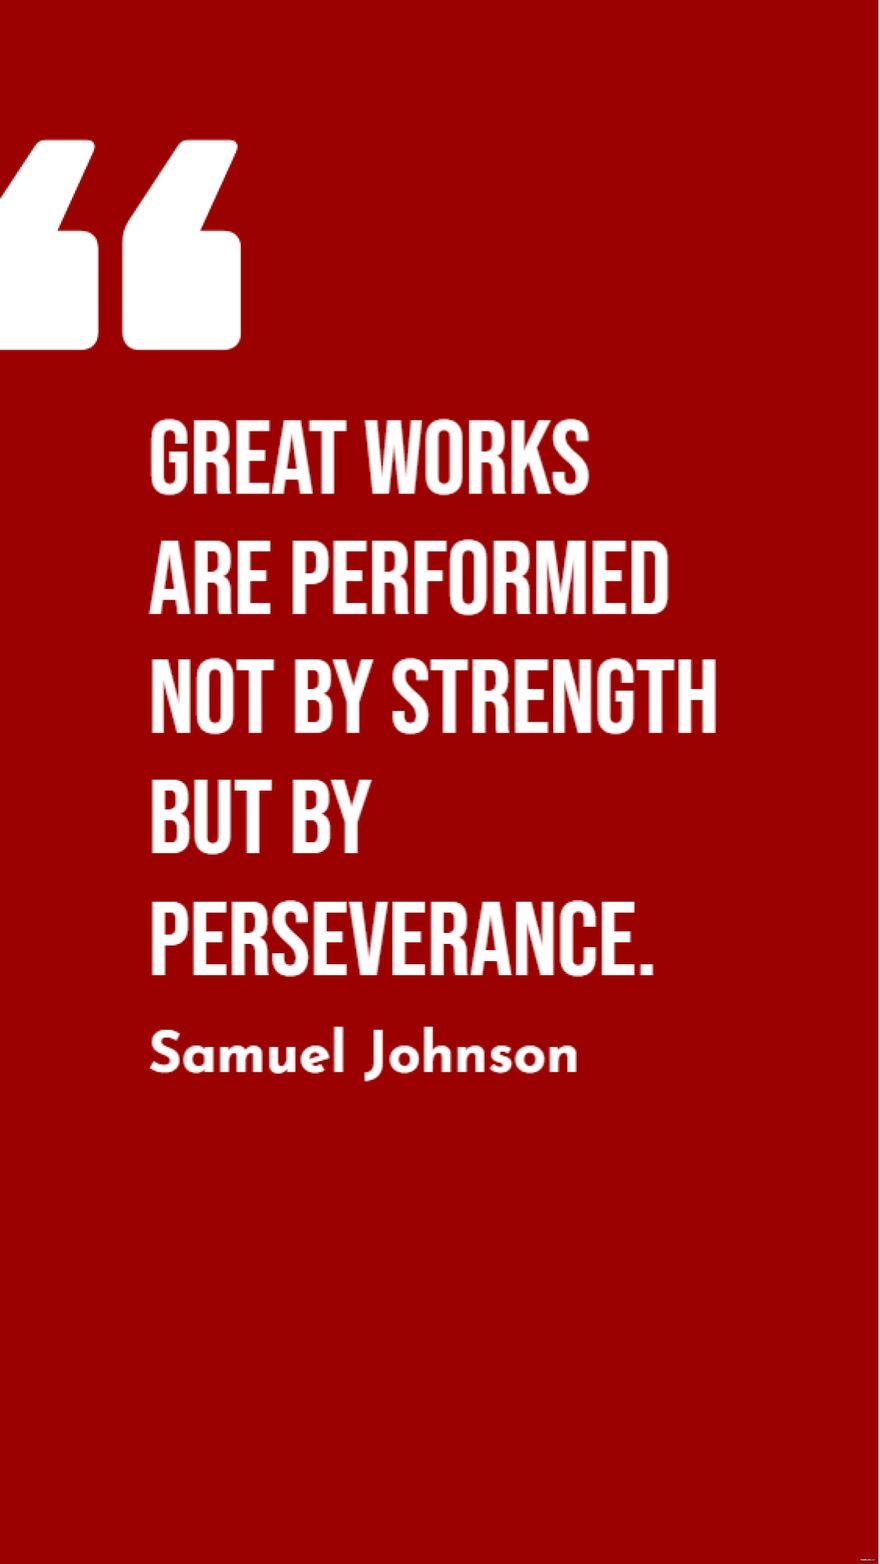 Free Samuel Johnson - Great works are performed not by strength but by perseverance. in JPG